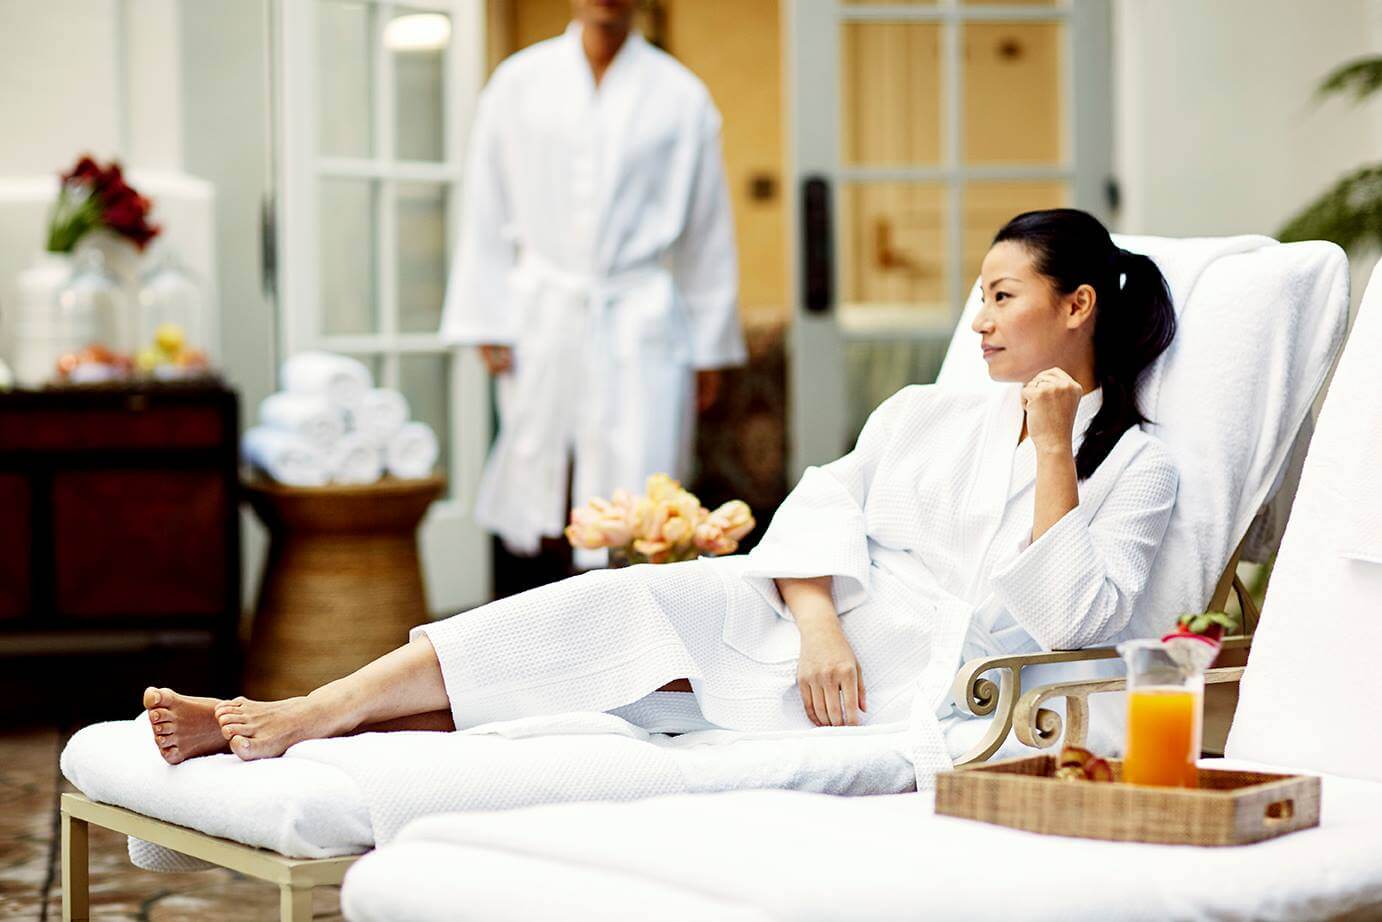 3 Things to Do to Find a Luxury Health Spa